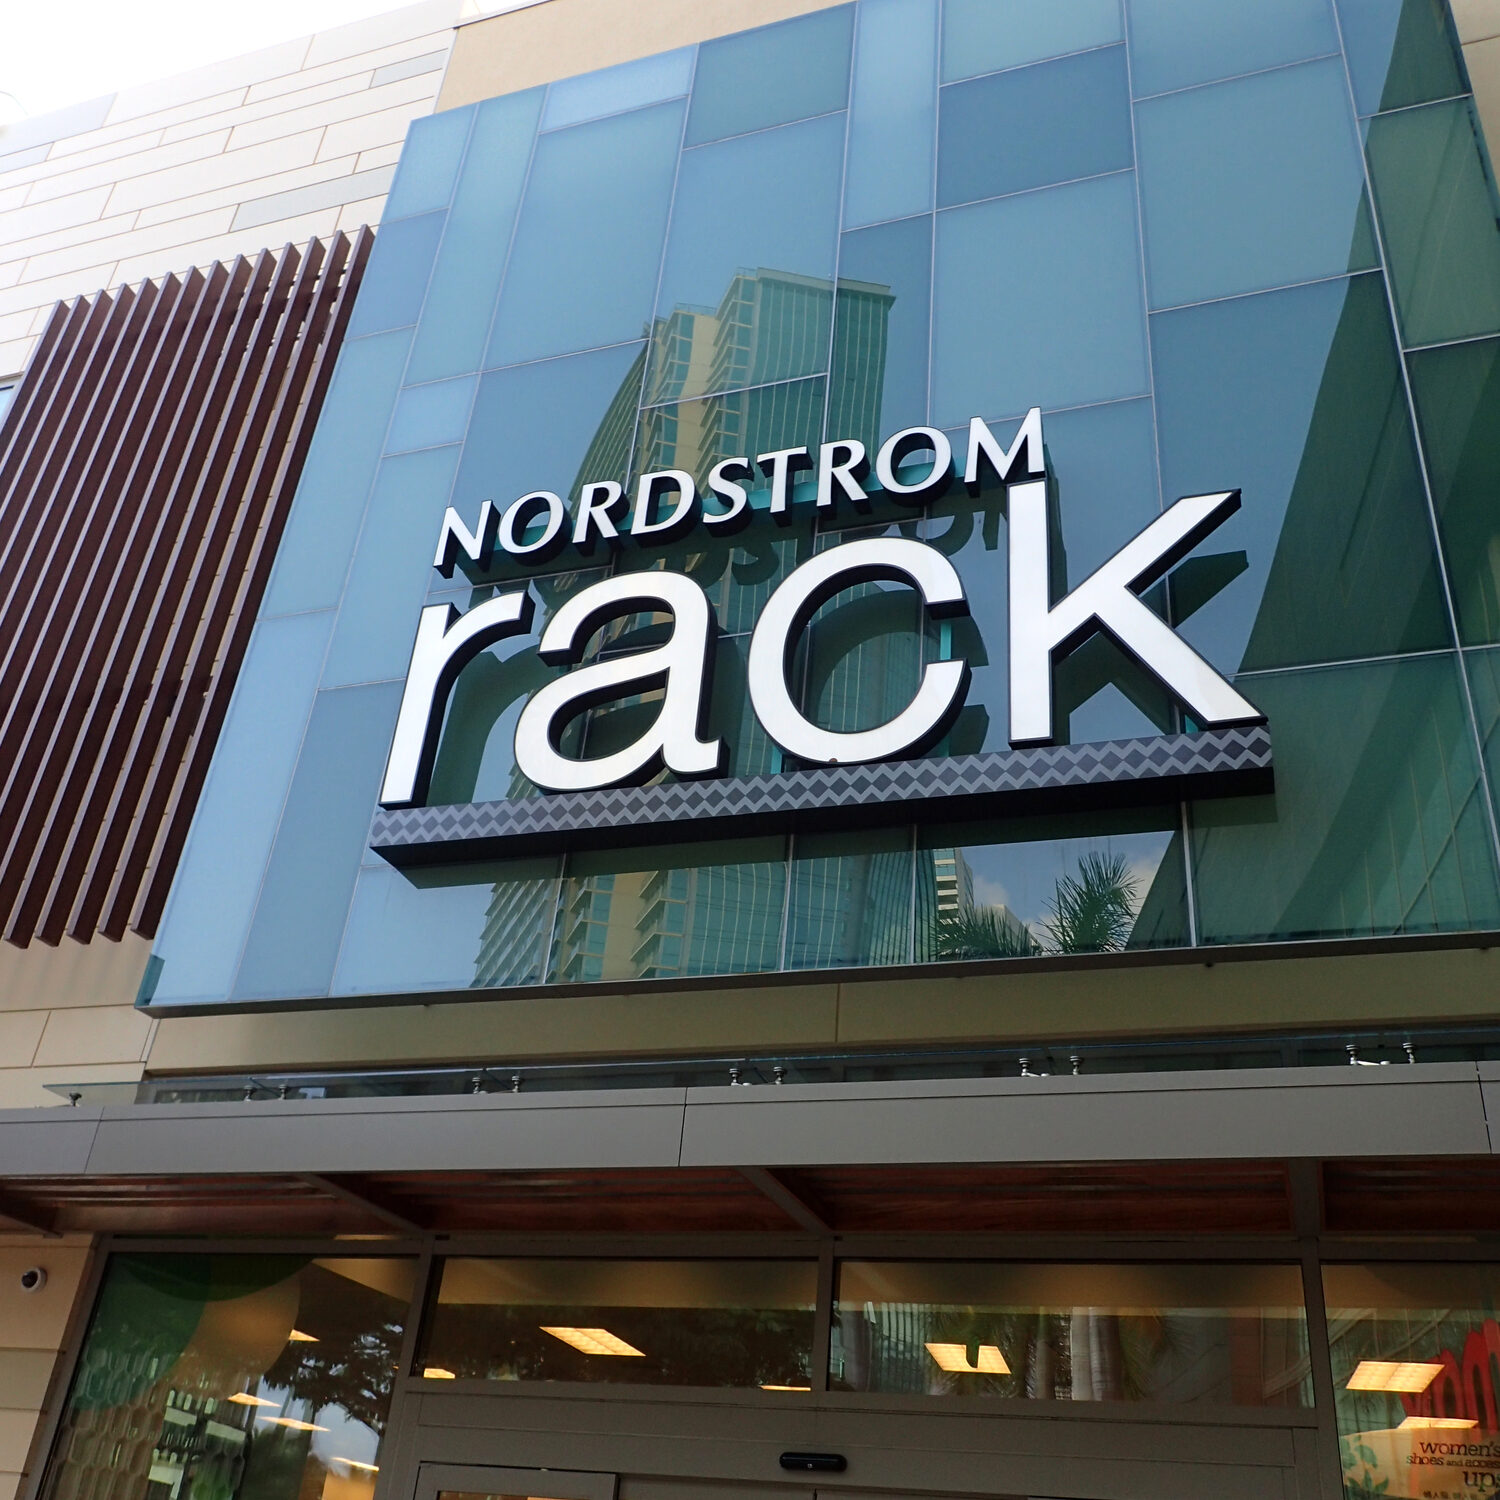 Clear the Rack — and stock your closet — with an extra 25% off clearance at Nordstrom  Rack